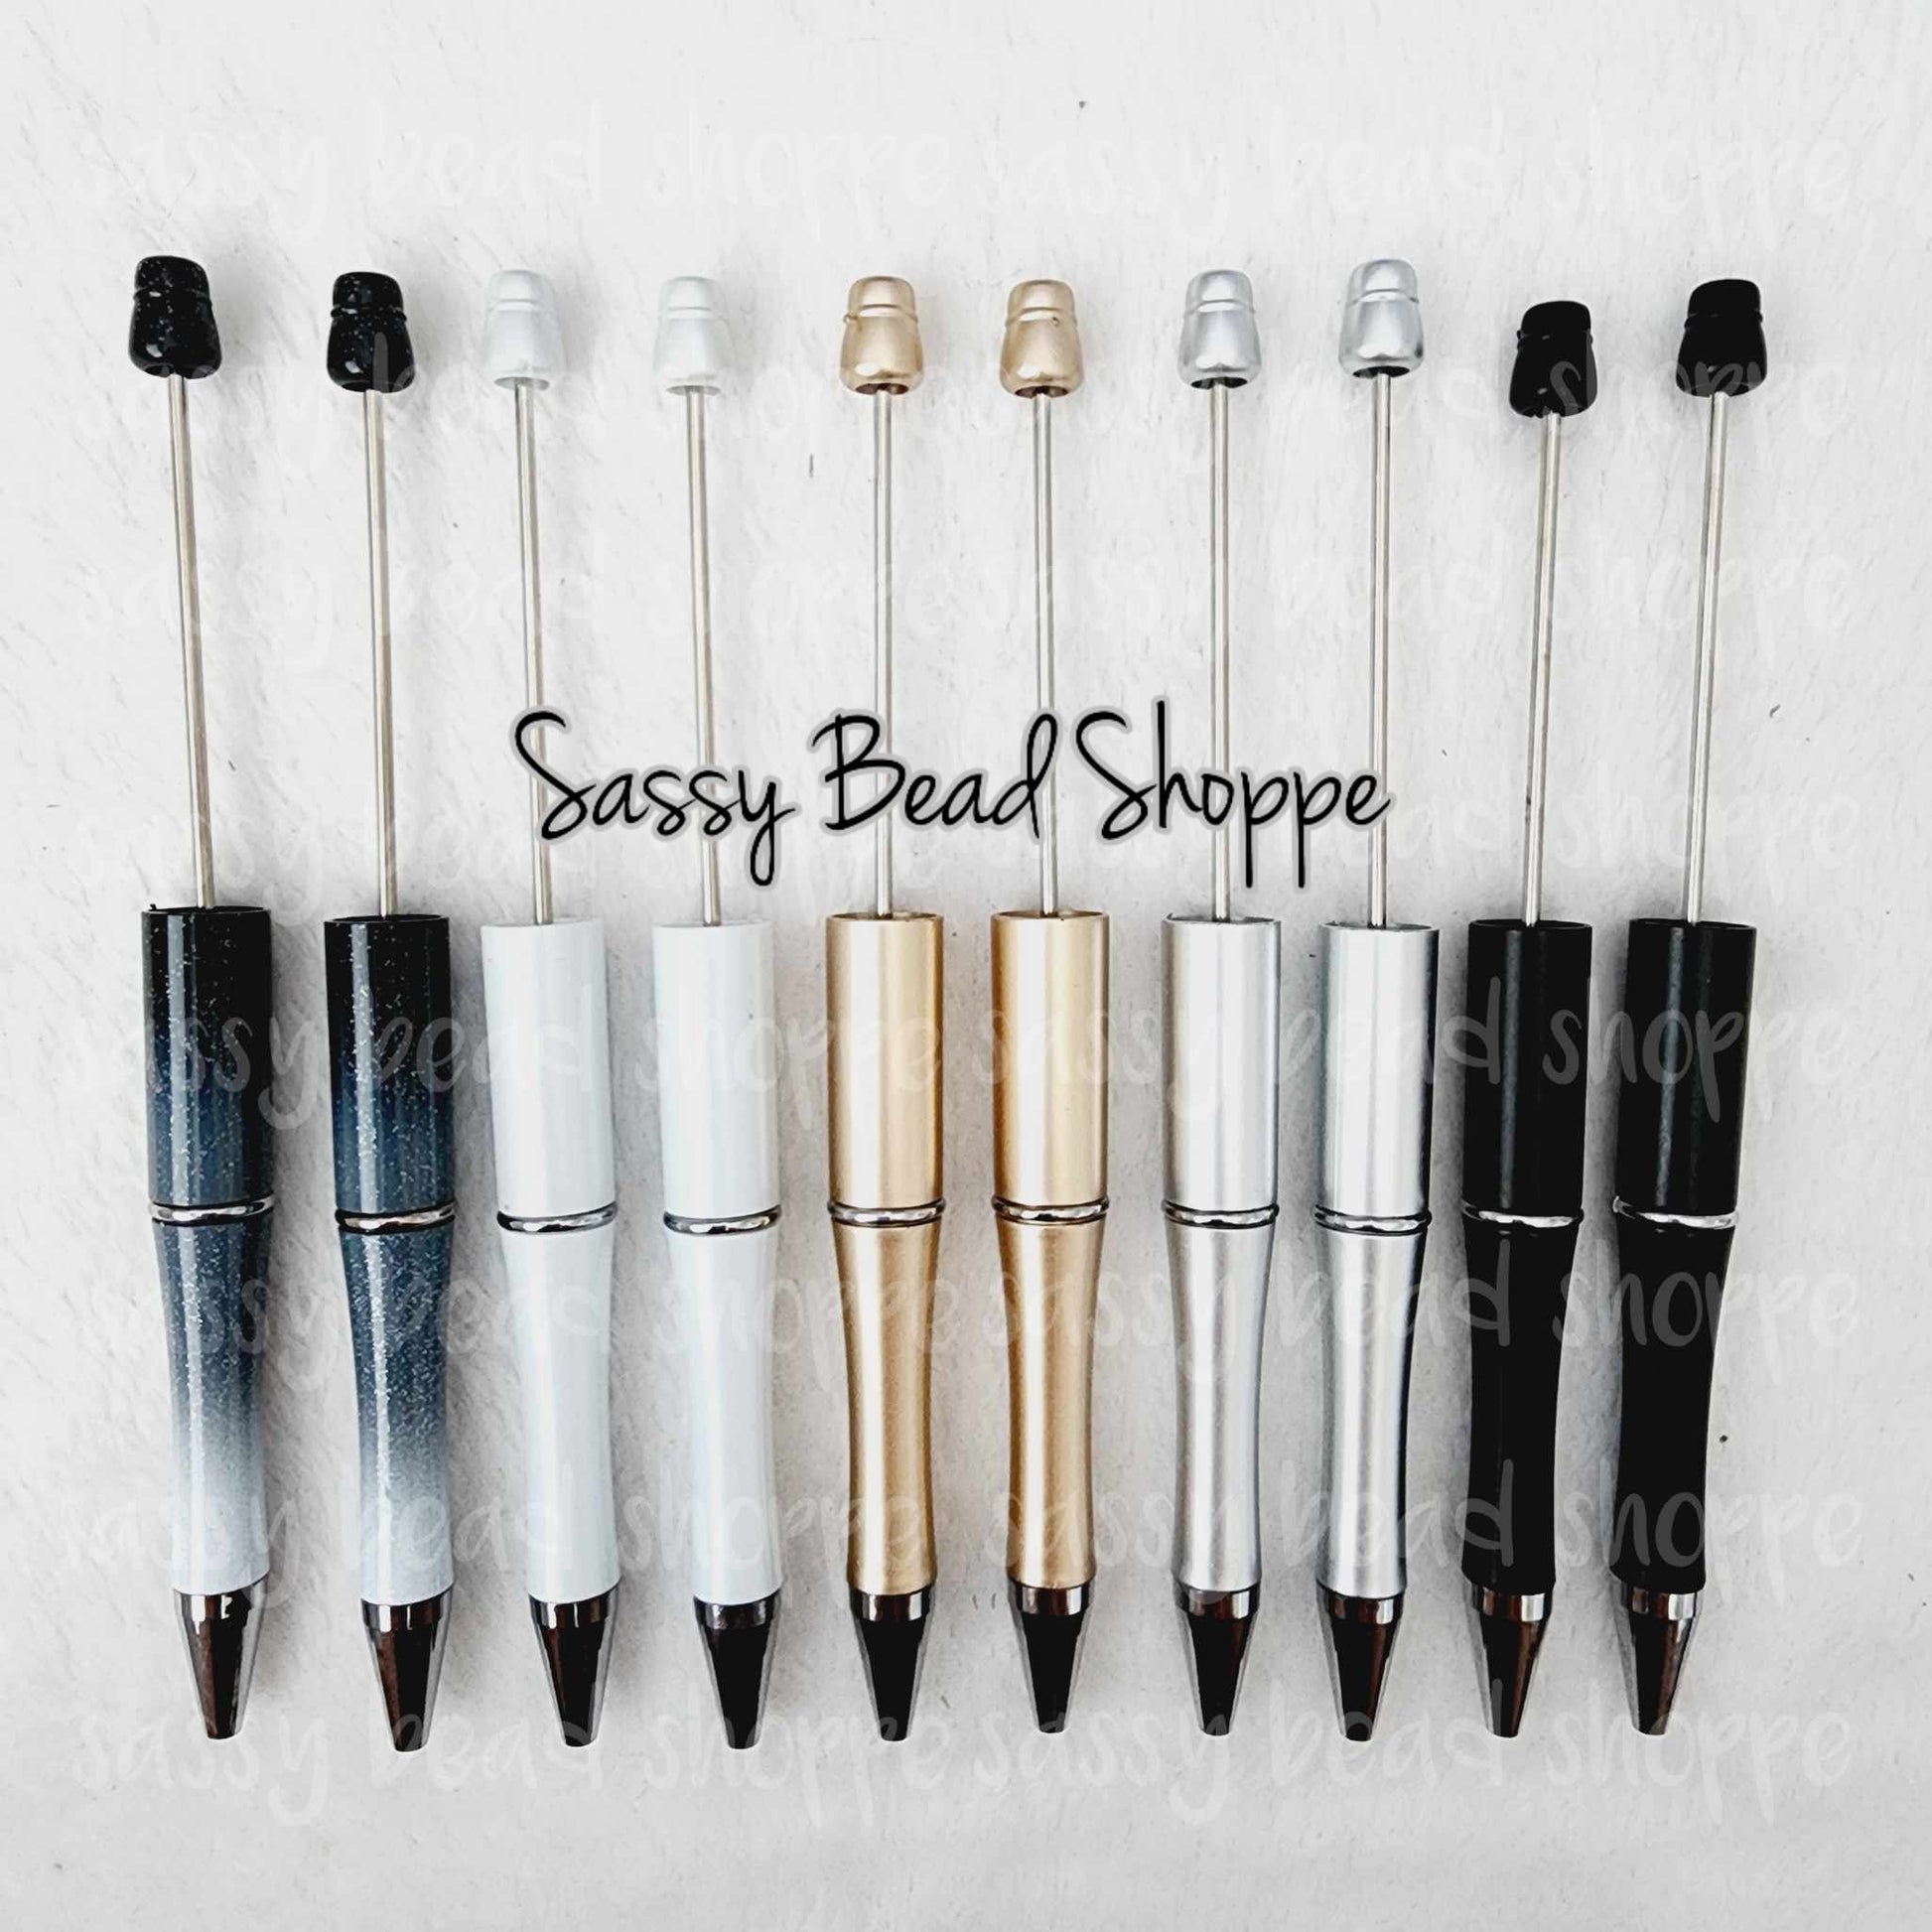 Sassy Bead Shoppe New Year New You Pen Pack Pack of 10